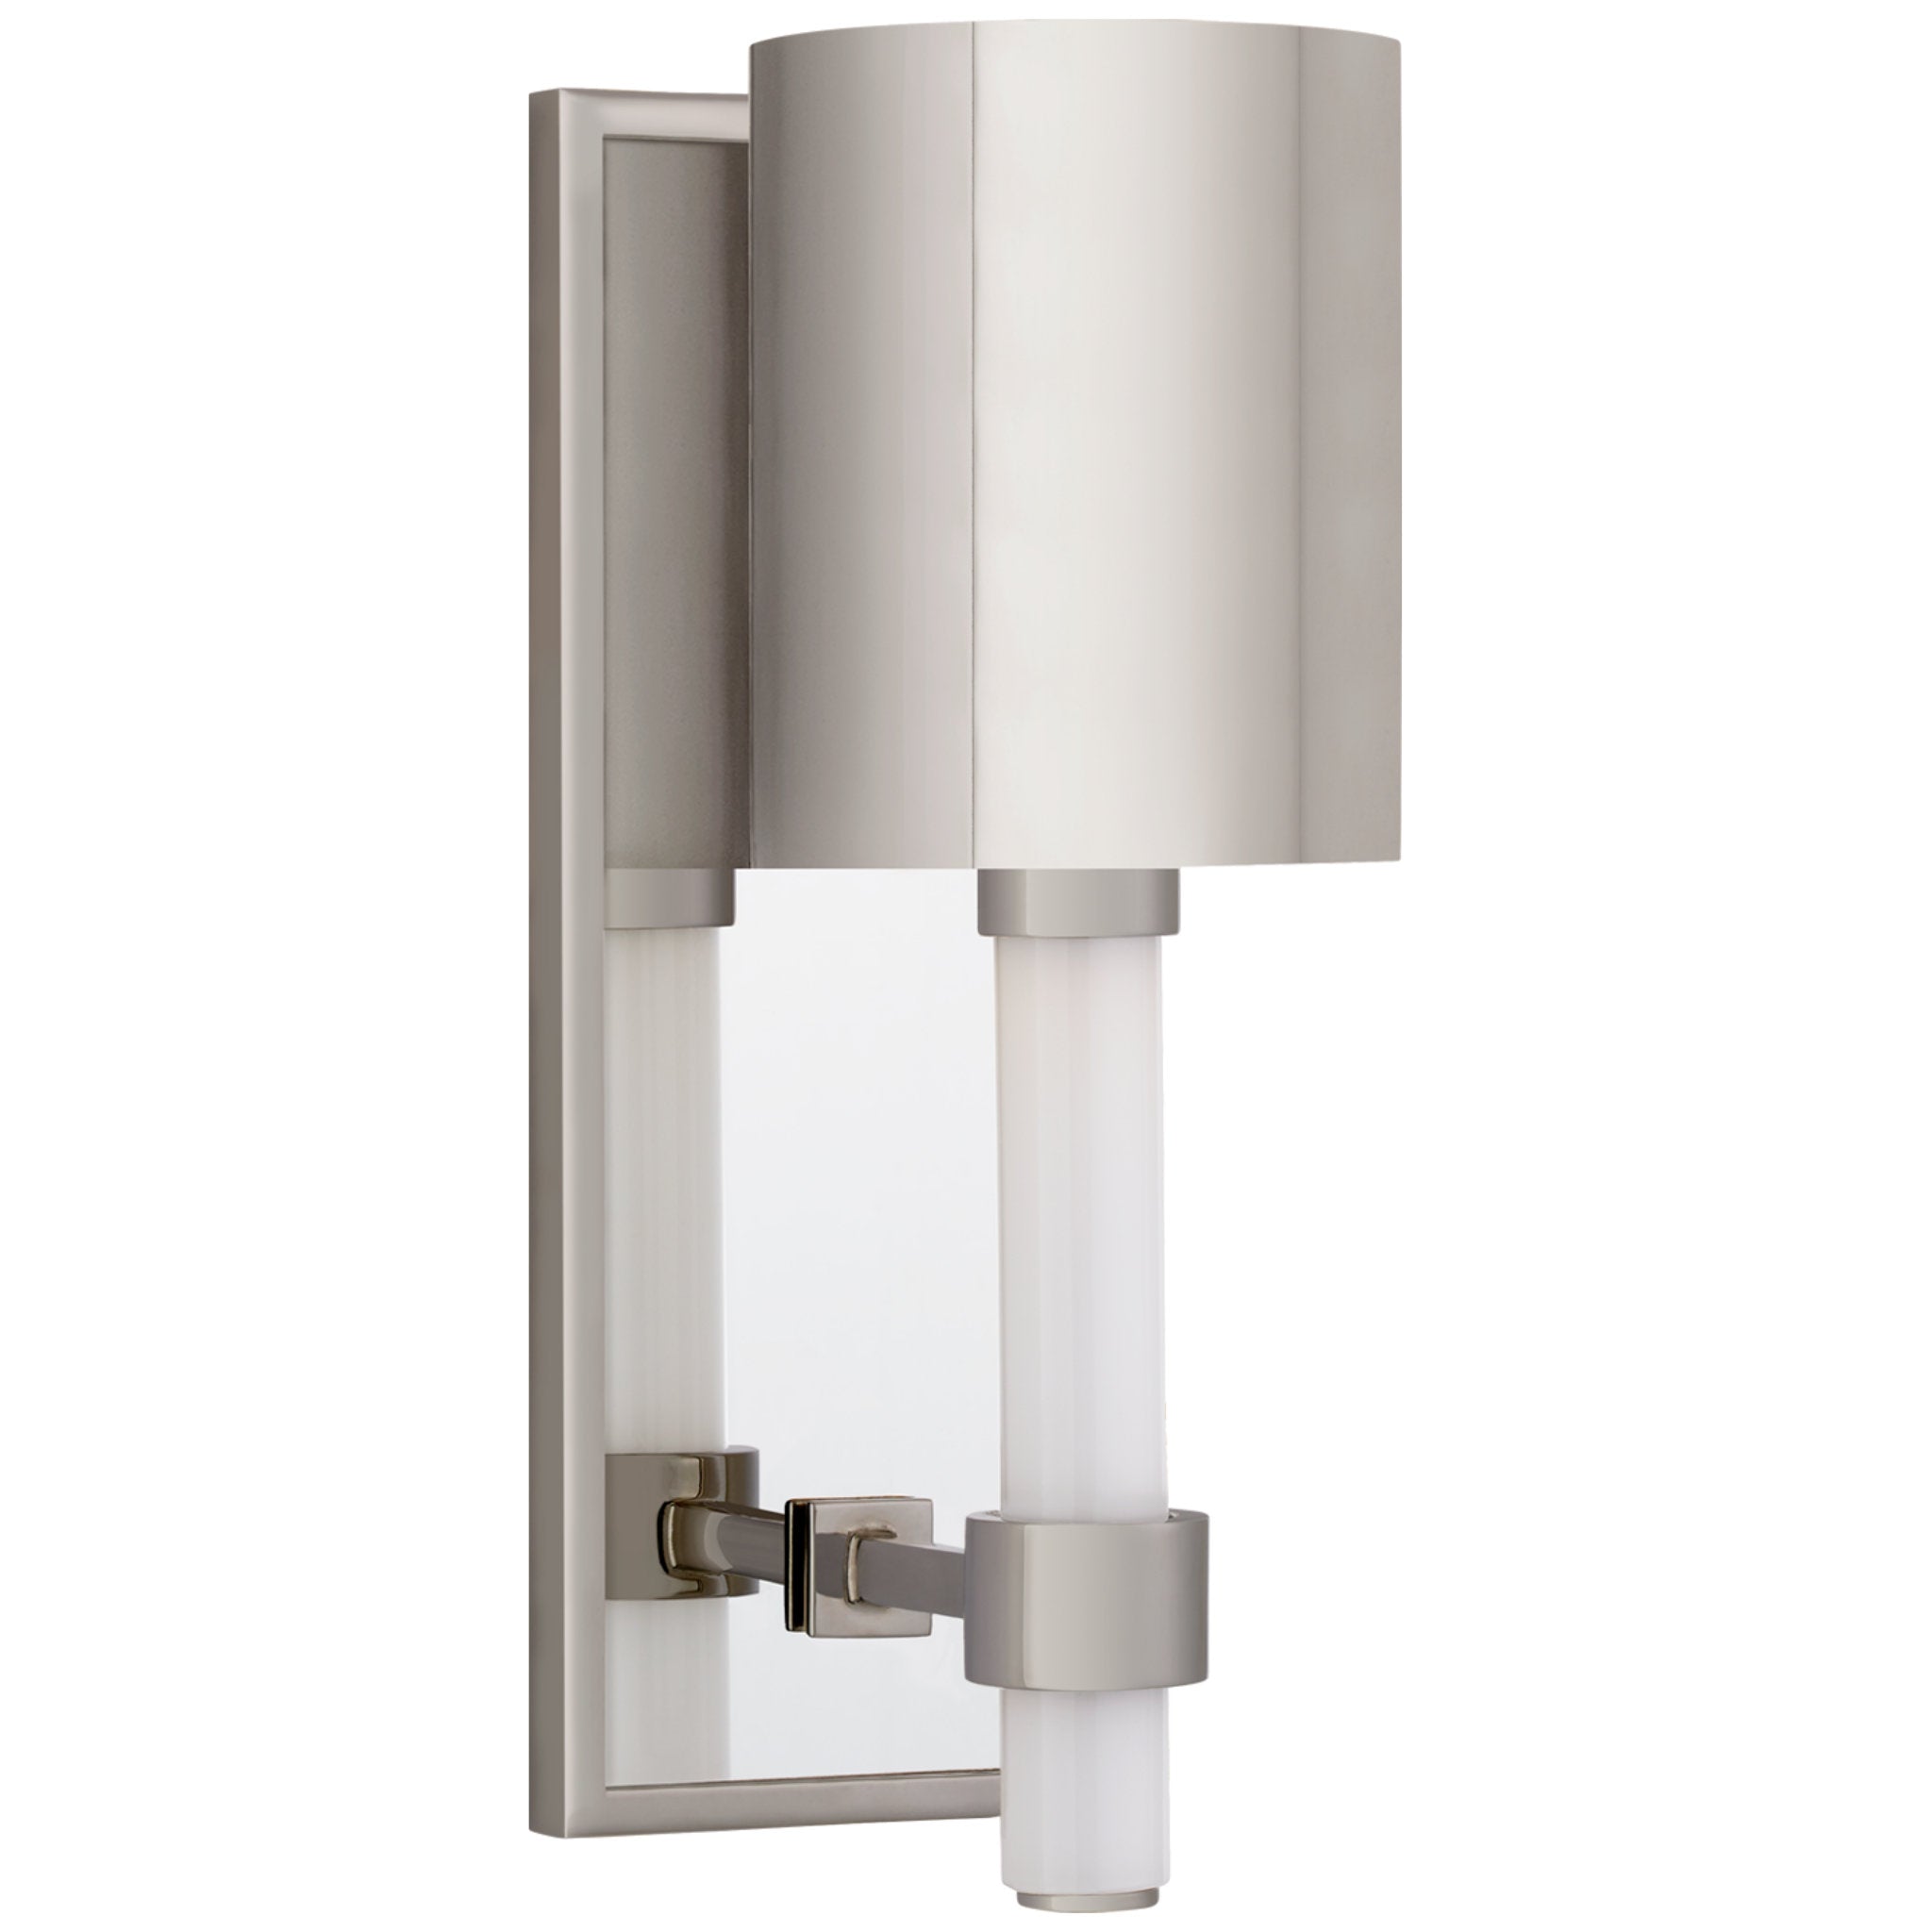 Suzanne Kasler Maribelle Single Sconce in Polished Nickel with Polished Nickel Shade